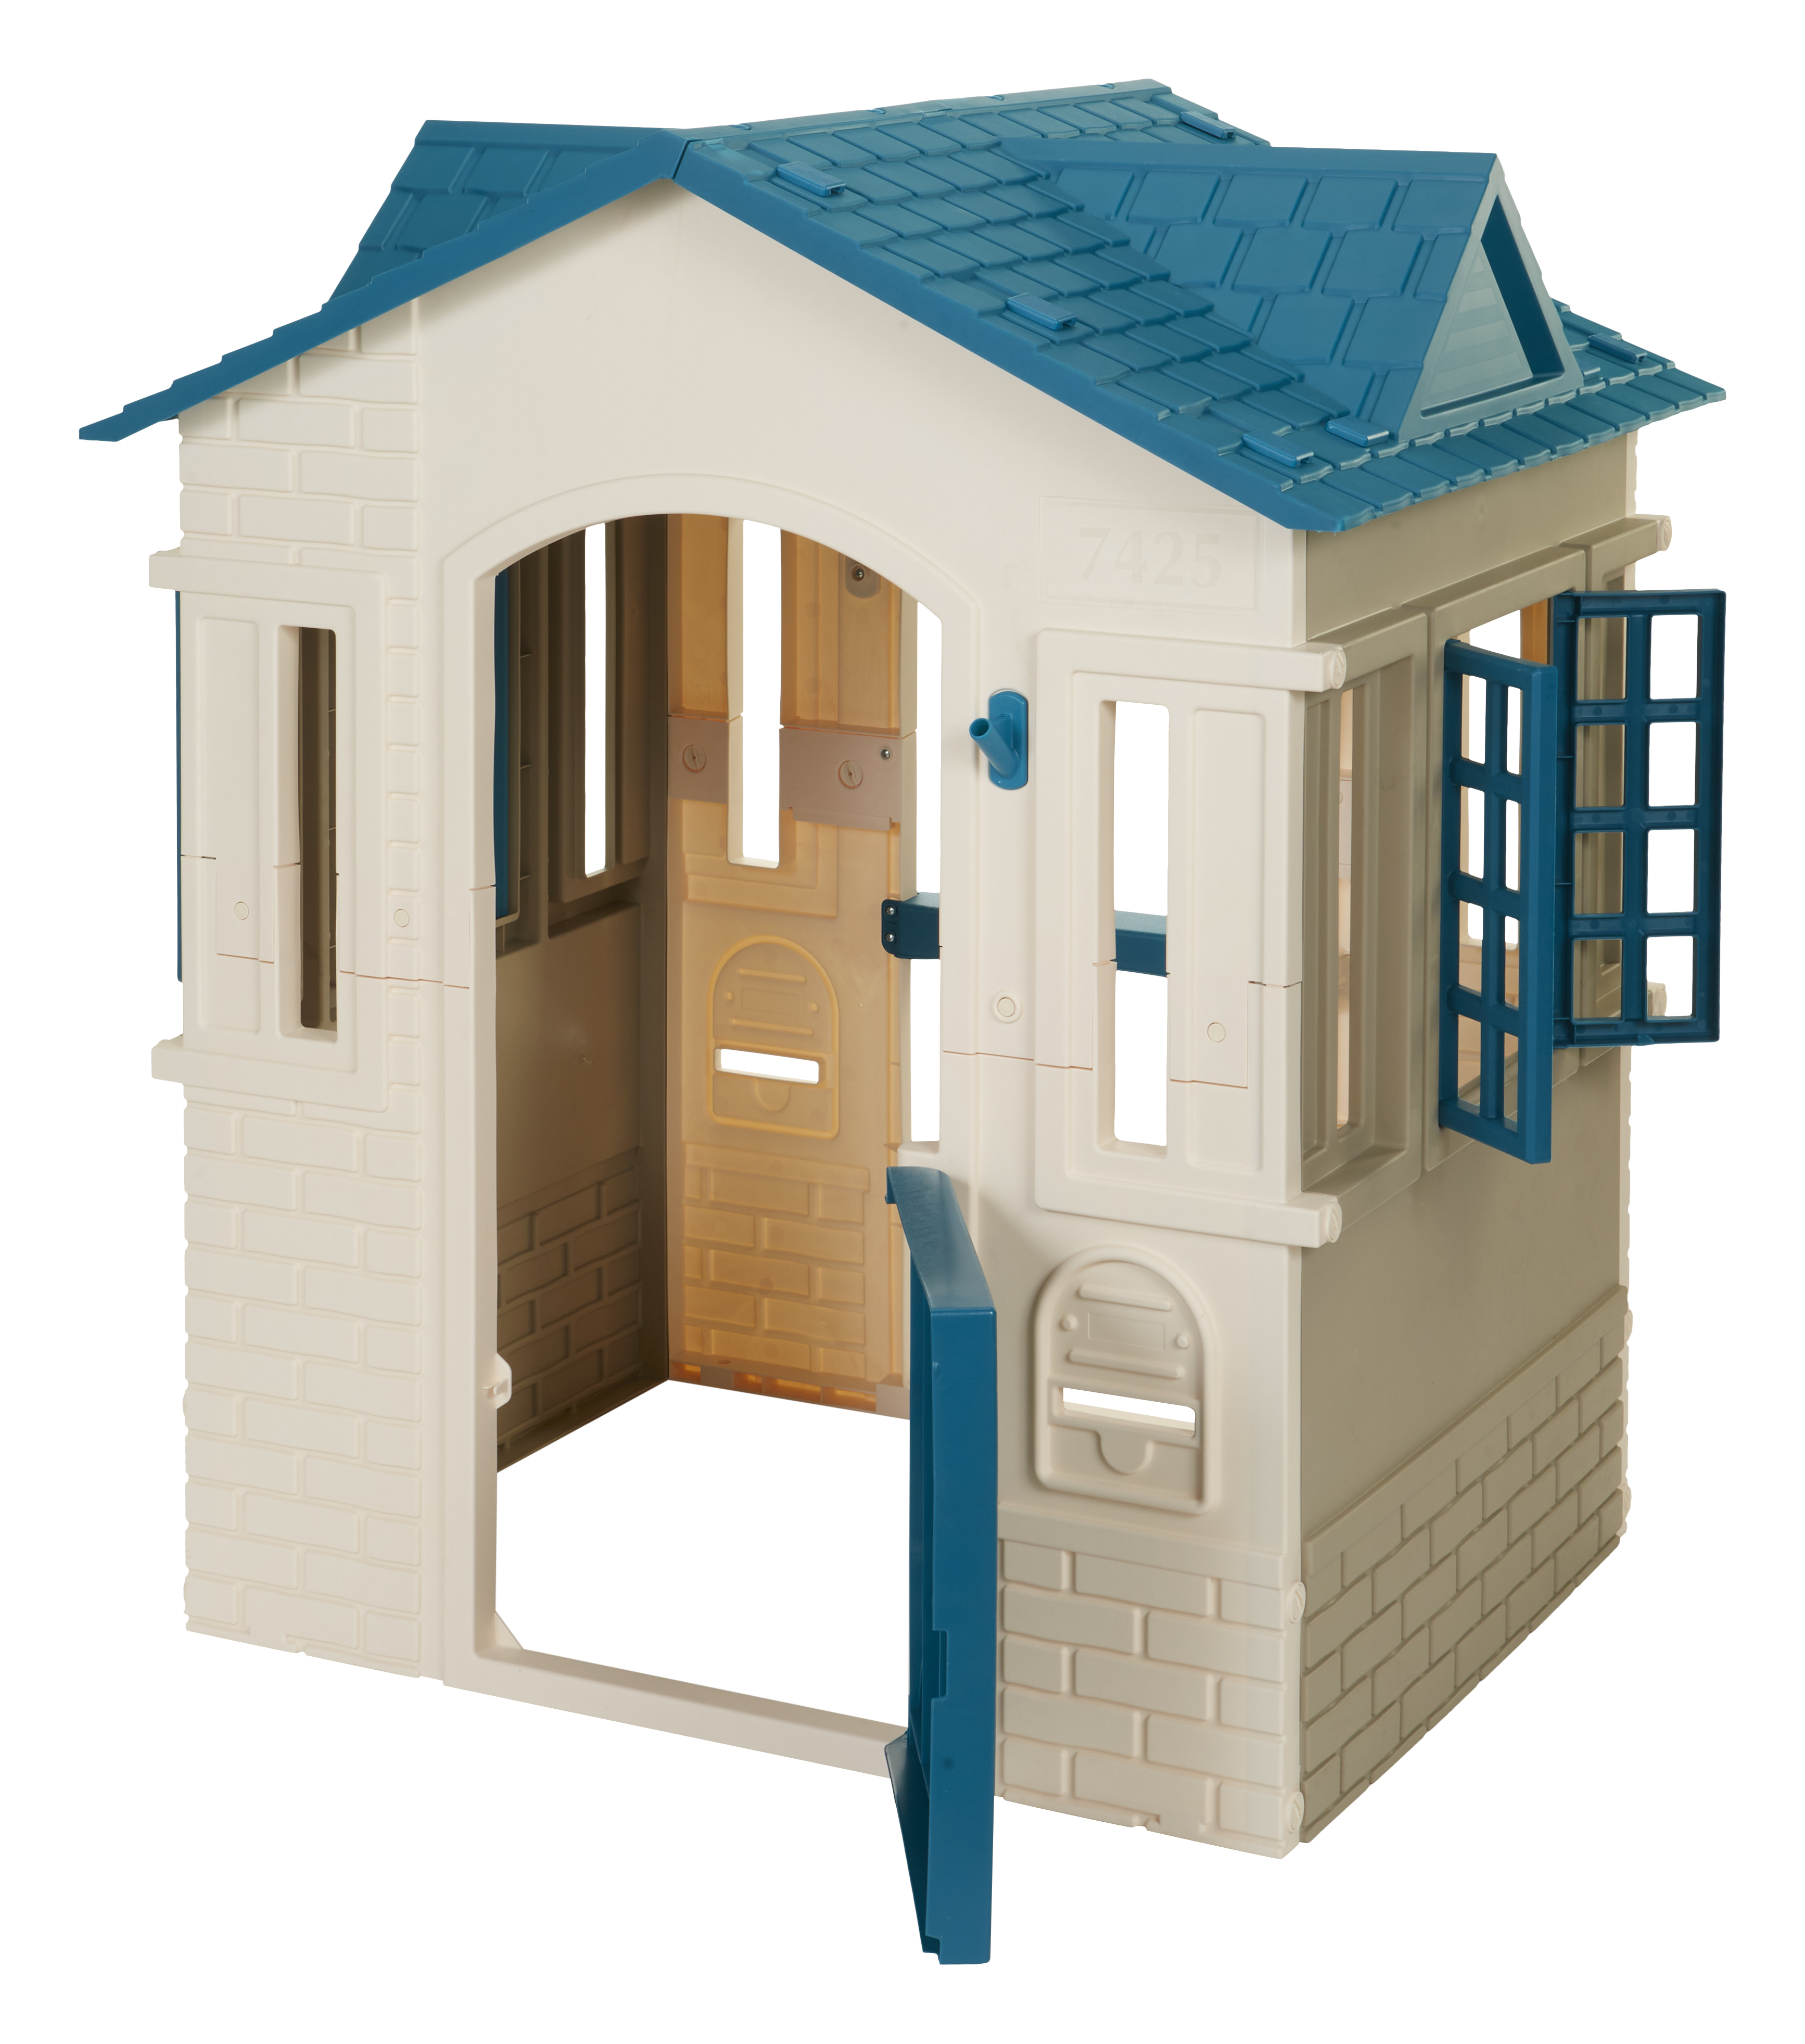 Little Tikes Cape Cottage Pretend Playhouse for Kids, Indoor Outdoor, with Working Door and Windows, for Toddlers Ages 2+ Years, Blue - image 14 of 17